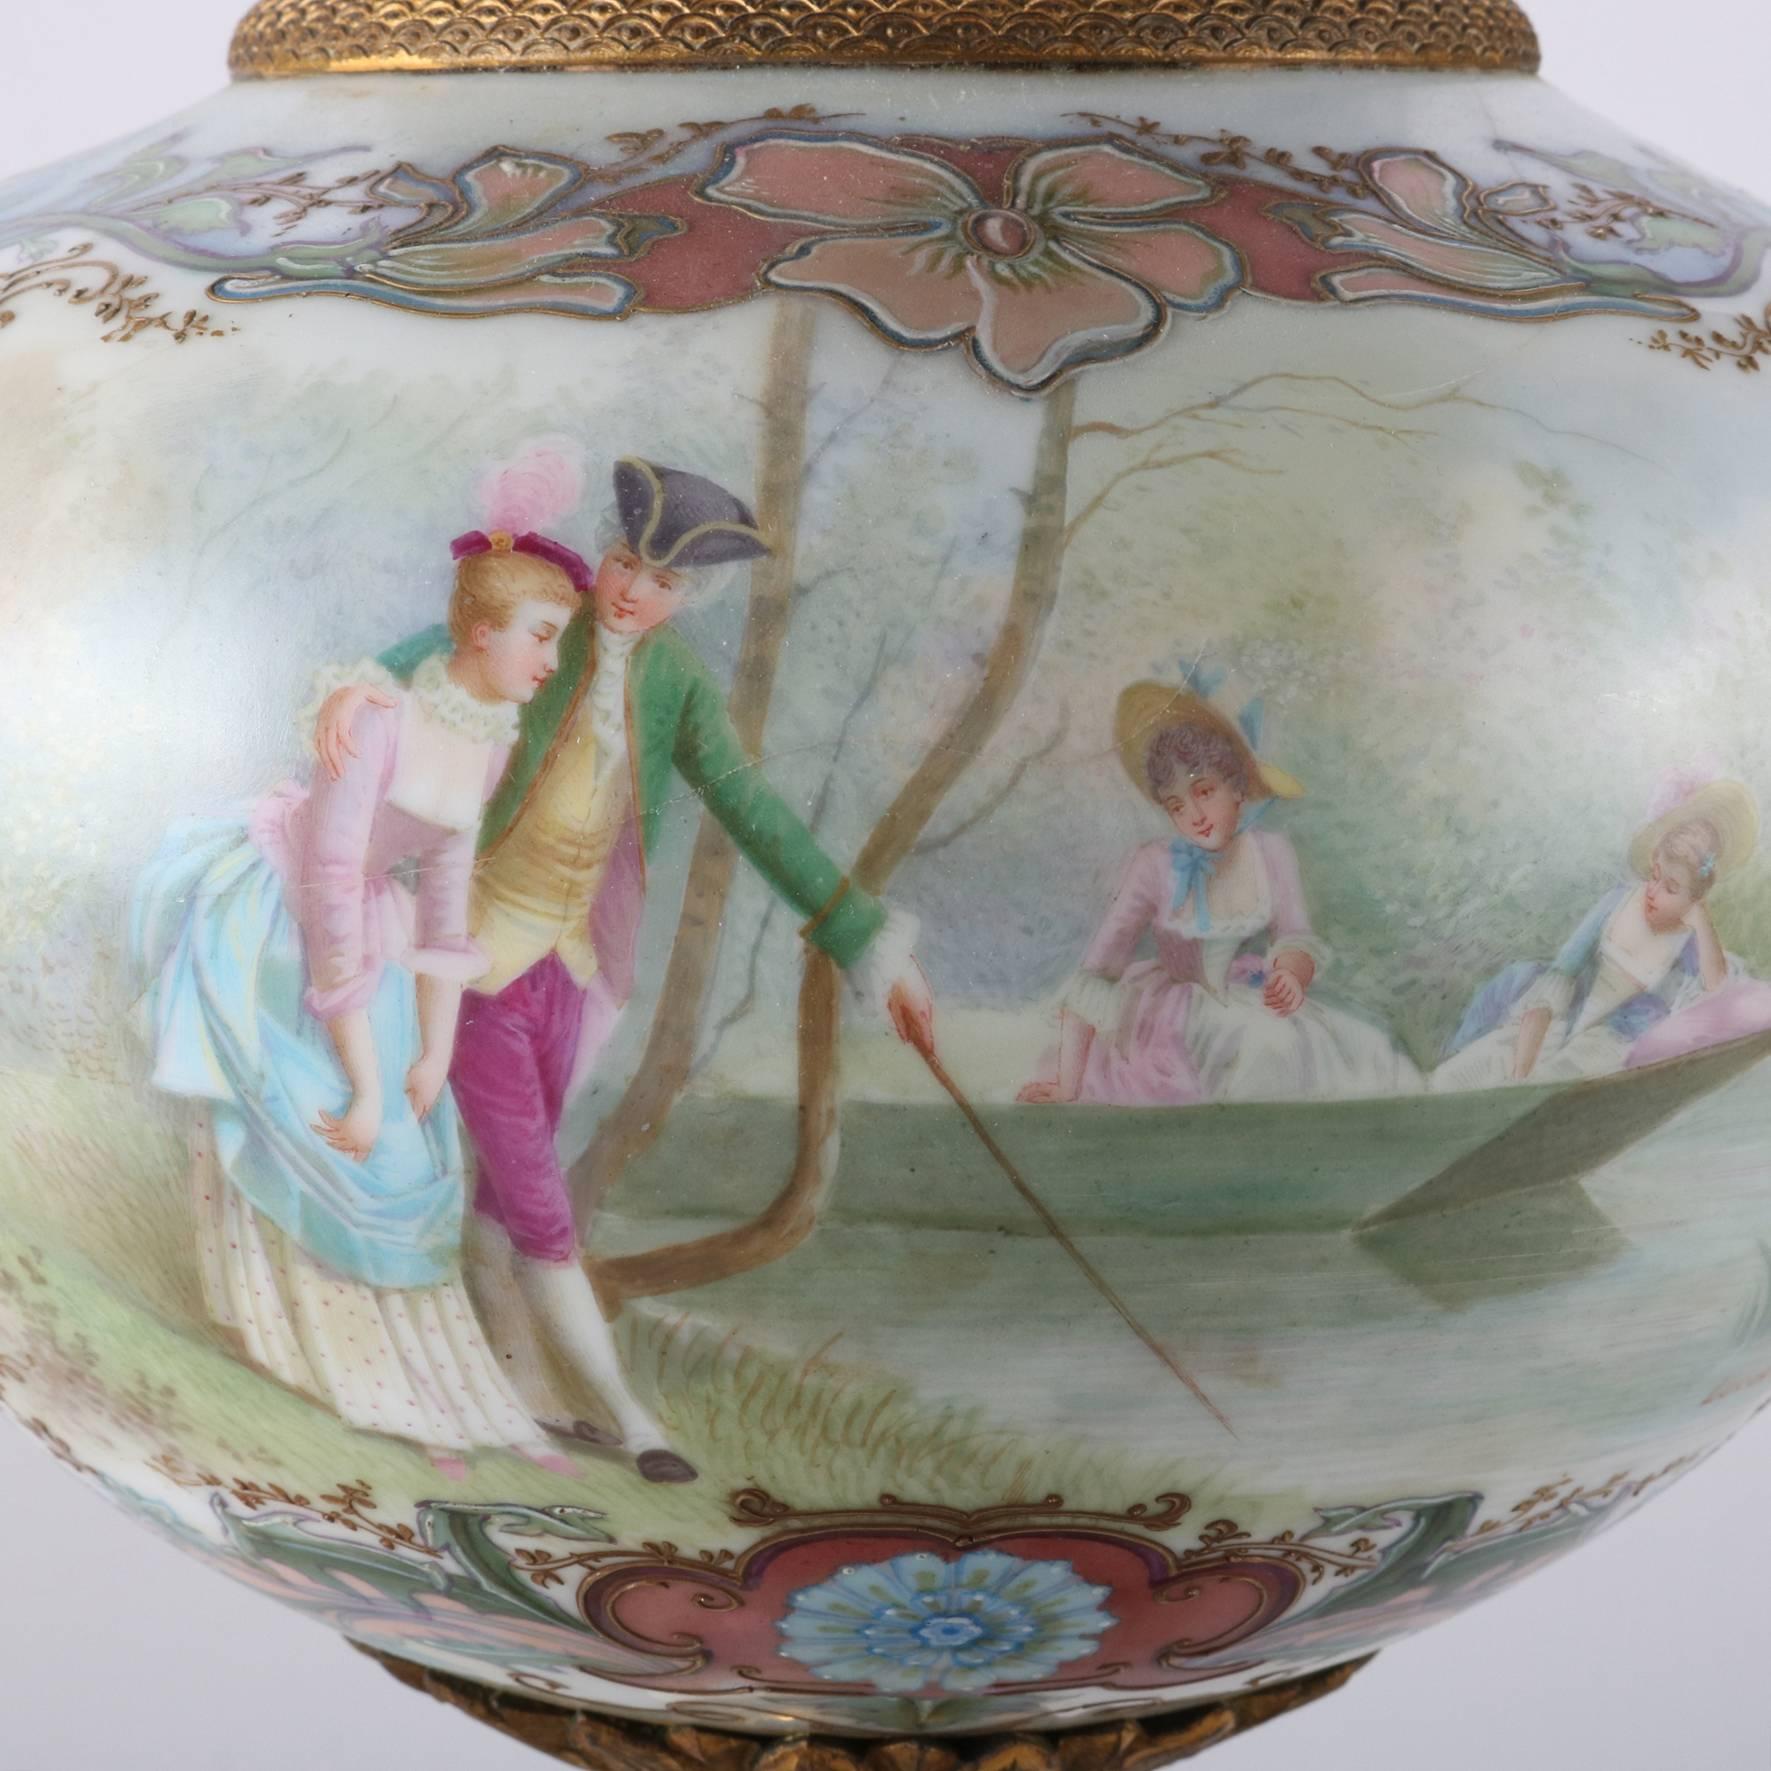 Antique French Sèvres porcelain urn features hand-painted reserve of countryside scene with courting couples signed Lucot, floral and gilt decoration, and cast bronze footed base, acorn finial and trim, 19th century

Measures: 19